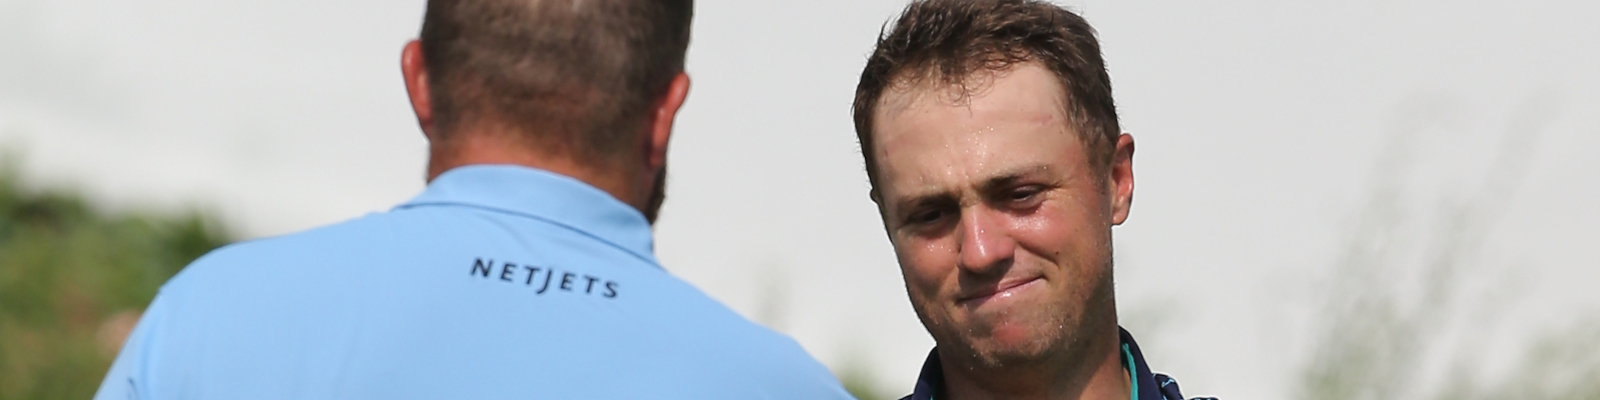 Shane Lowry und Justin Thomas (Photo by Lee Coleman/Icon Sportswire via Getty Images)